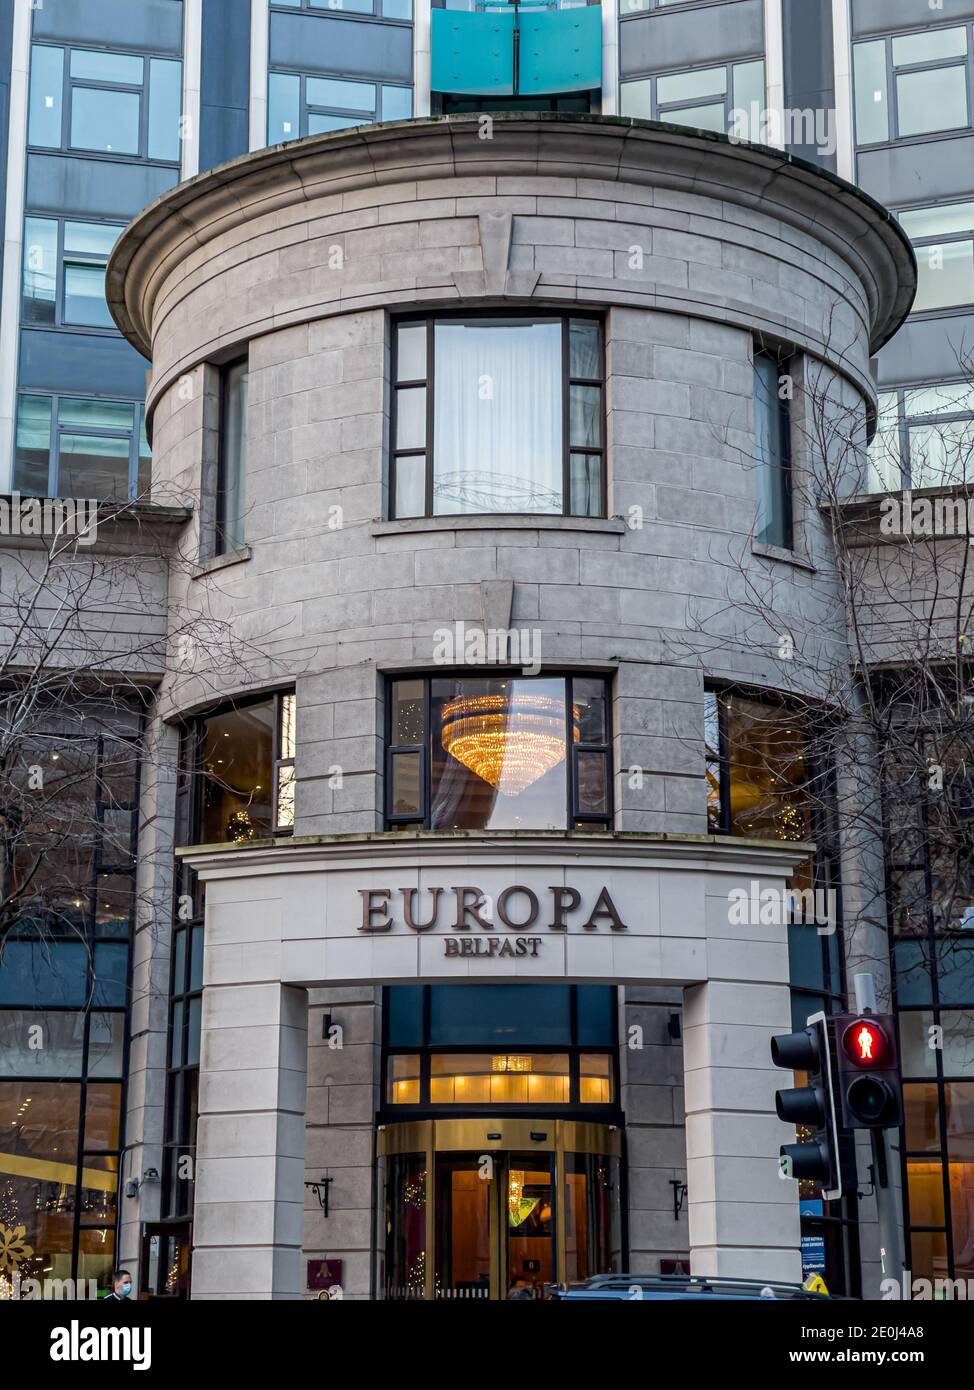 Belfast, Northern Ireland - Dec 19, 2020: The sign and front entrance for the Europa Hotel in Belfast Stock Photo